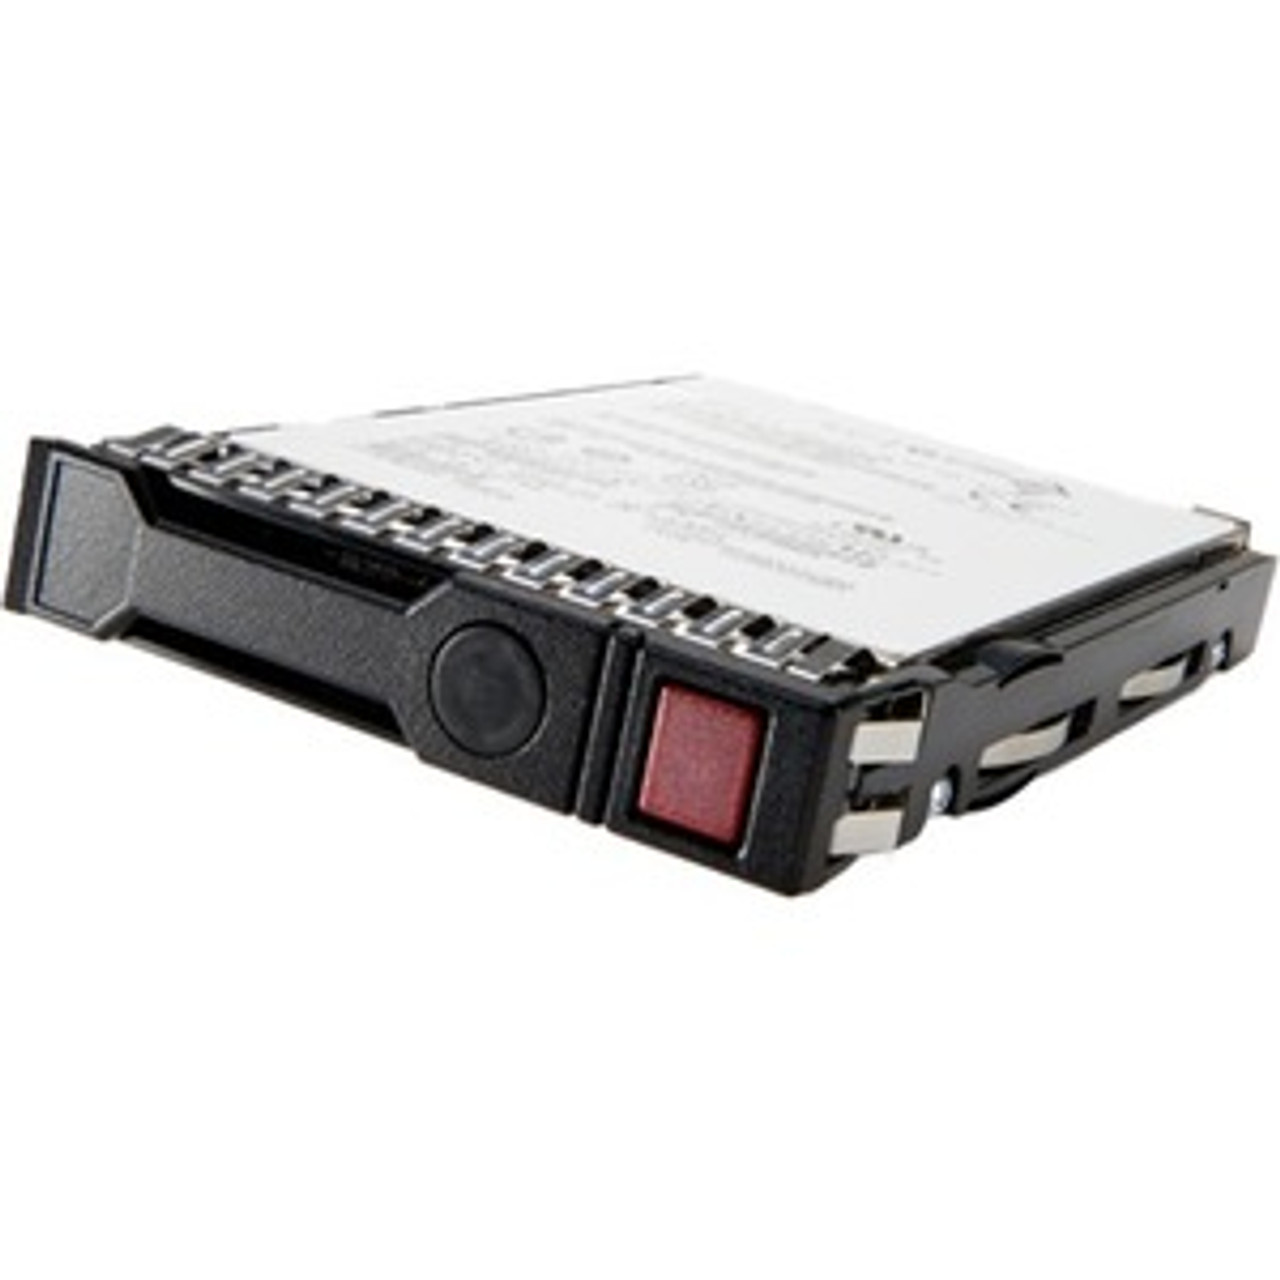 832514-H21#0D1 HPE 1TB 7200RPM SAS 12Gbps 2.5-inch Internal Hard Drive with Smart Carrier